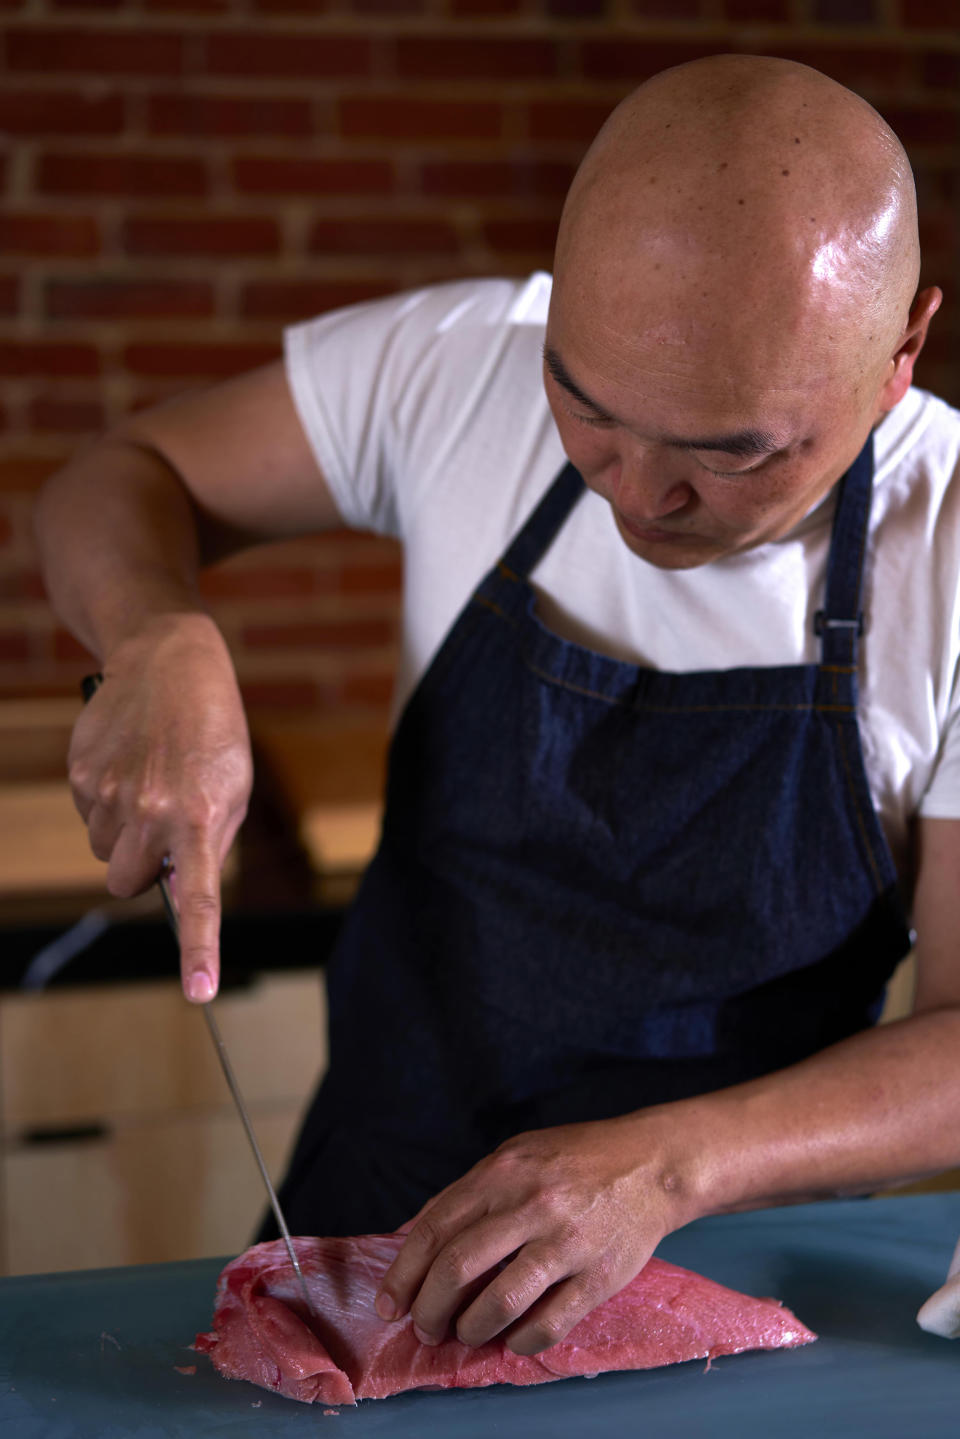 Dallas sushi chef learned how to sign the menu for deaf patrons (Courtesy Tatsu Dallas)